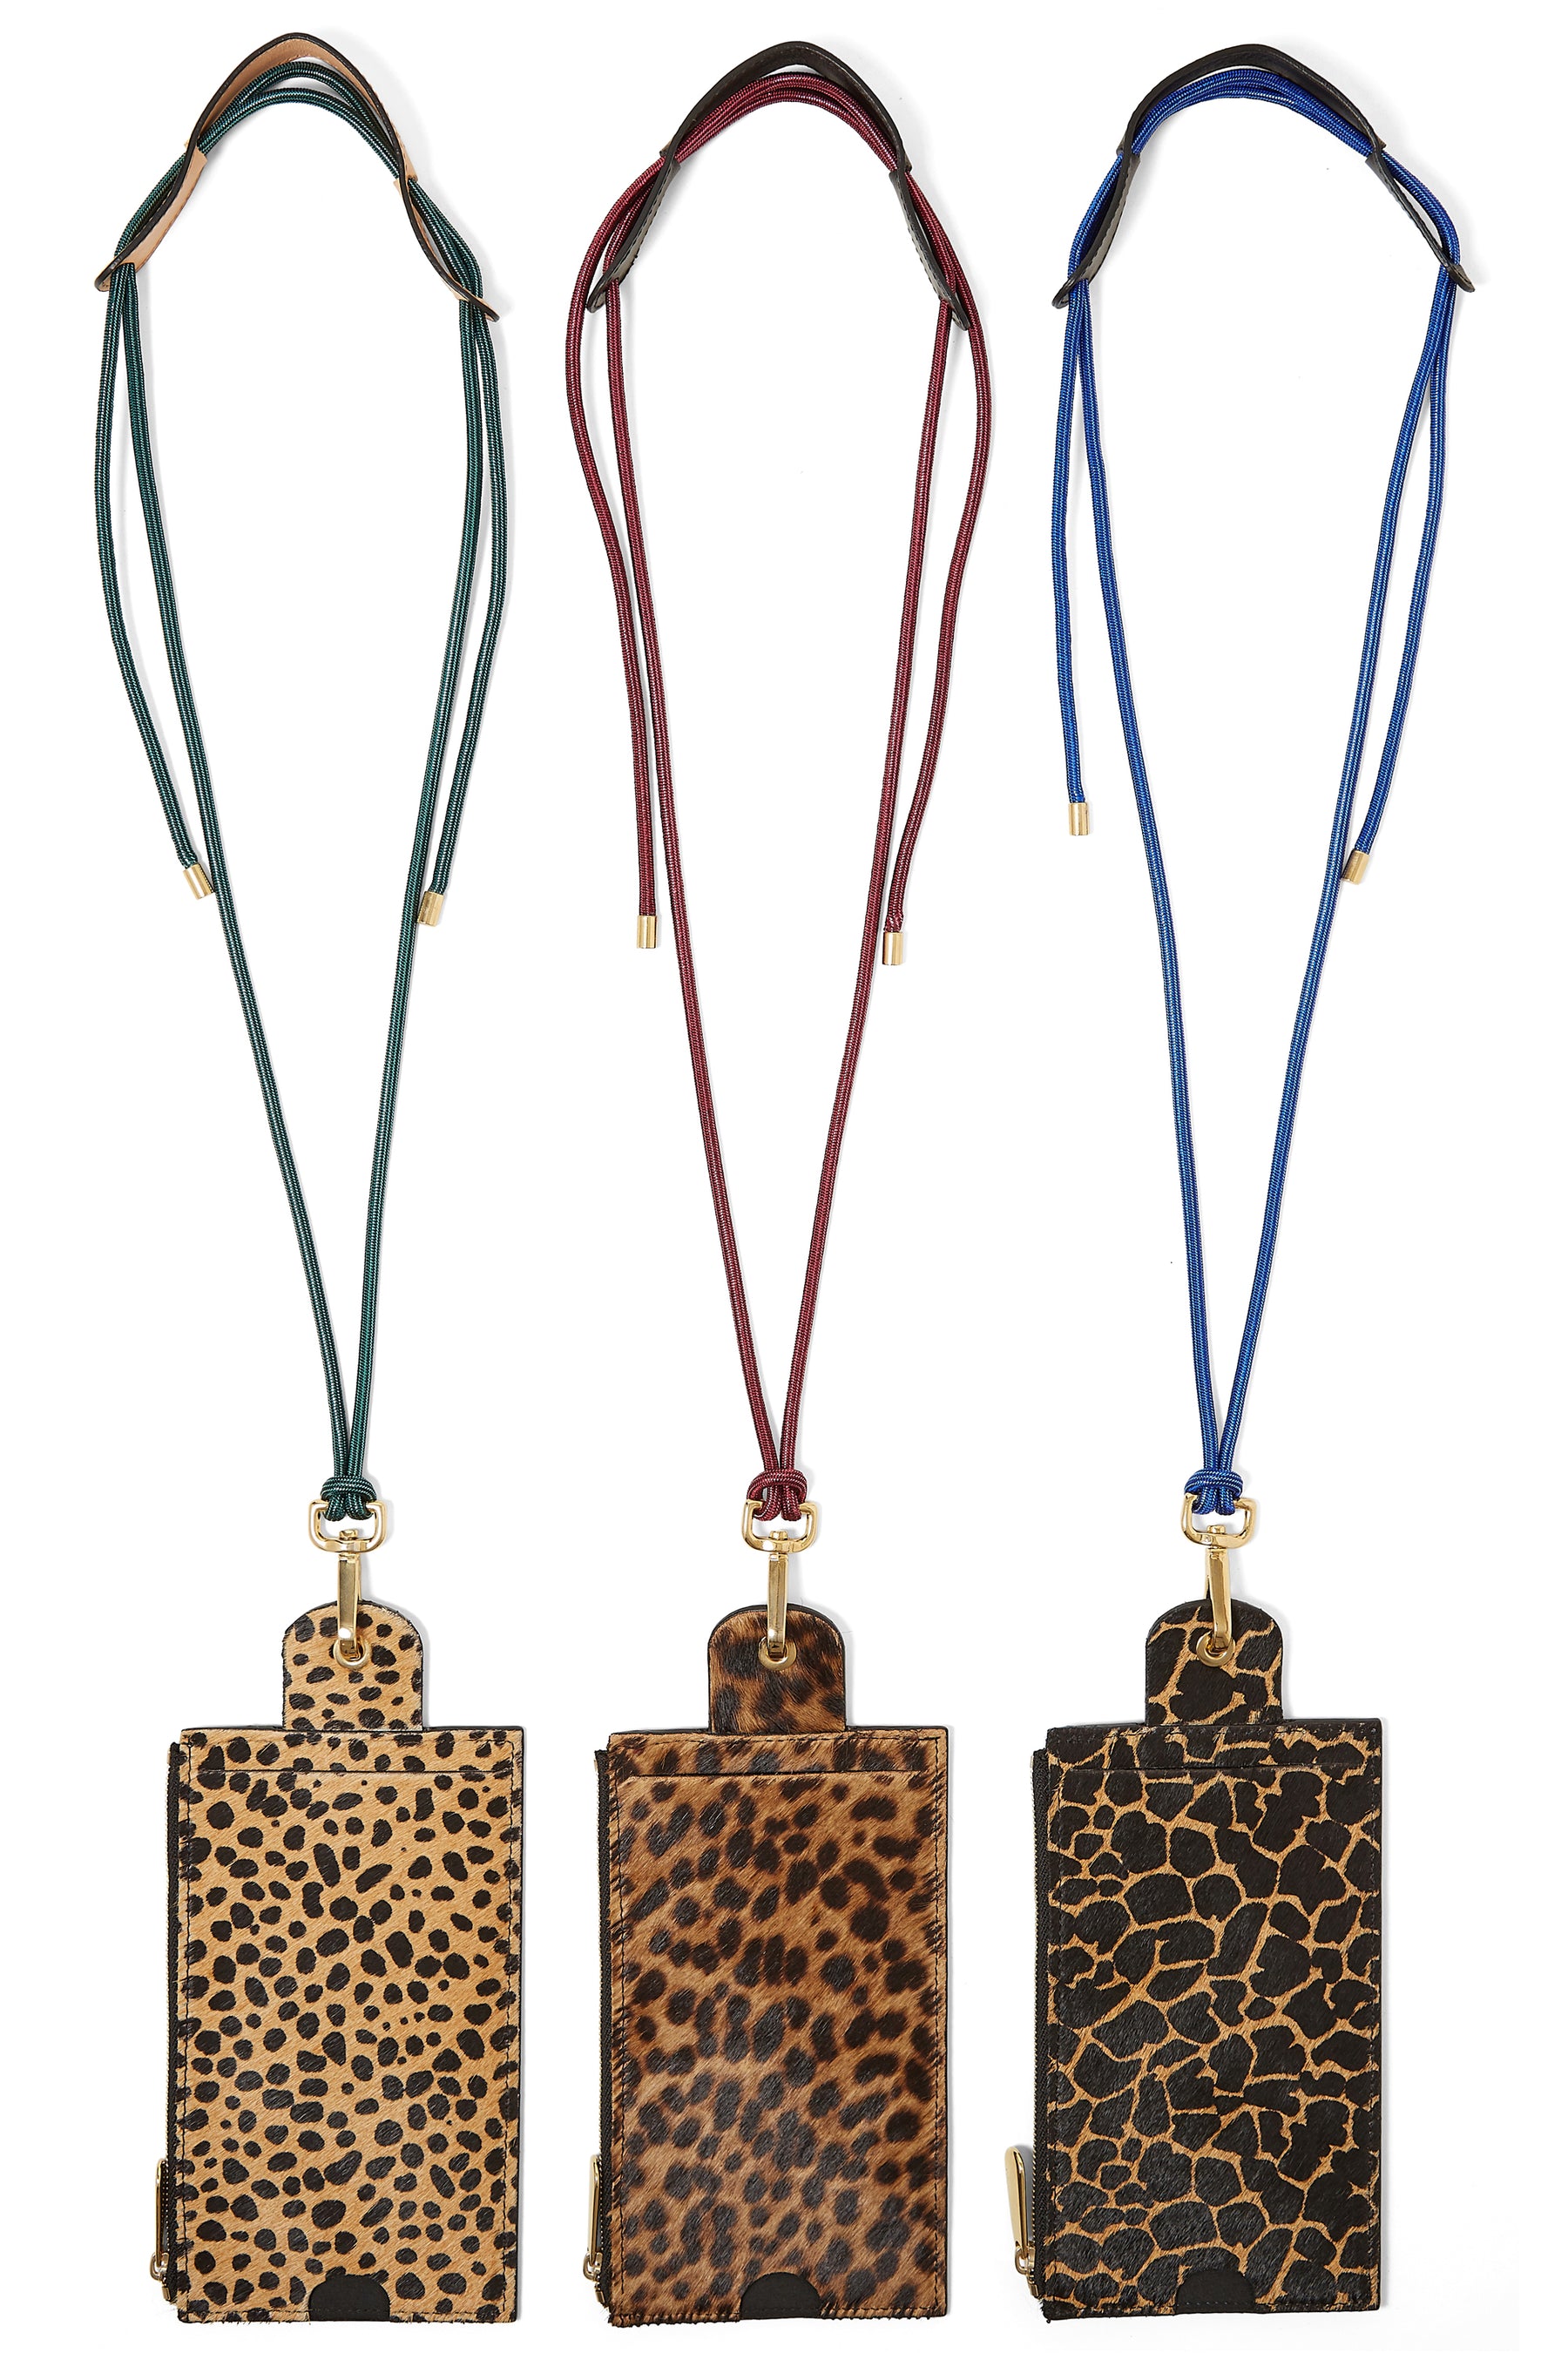 The Minis - Large neck wallet in Leopard printed leather